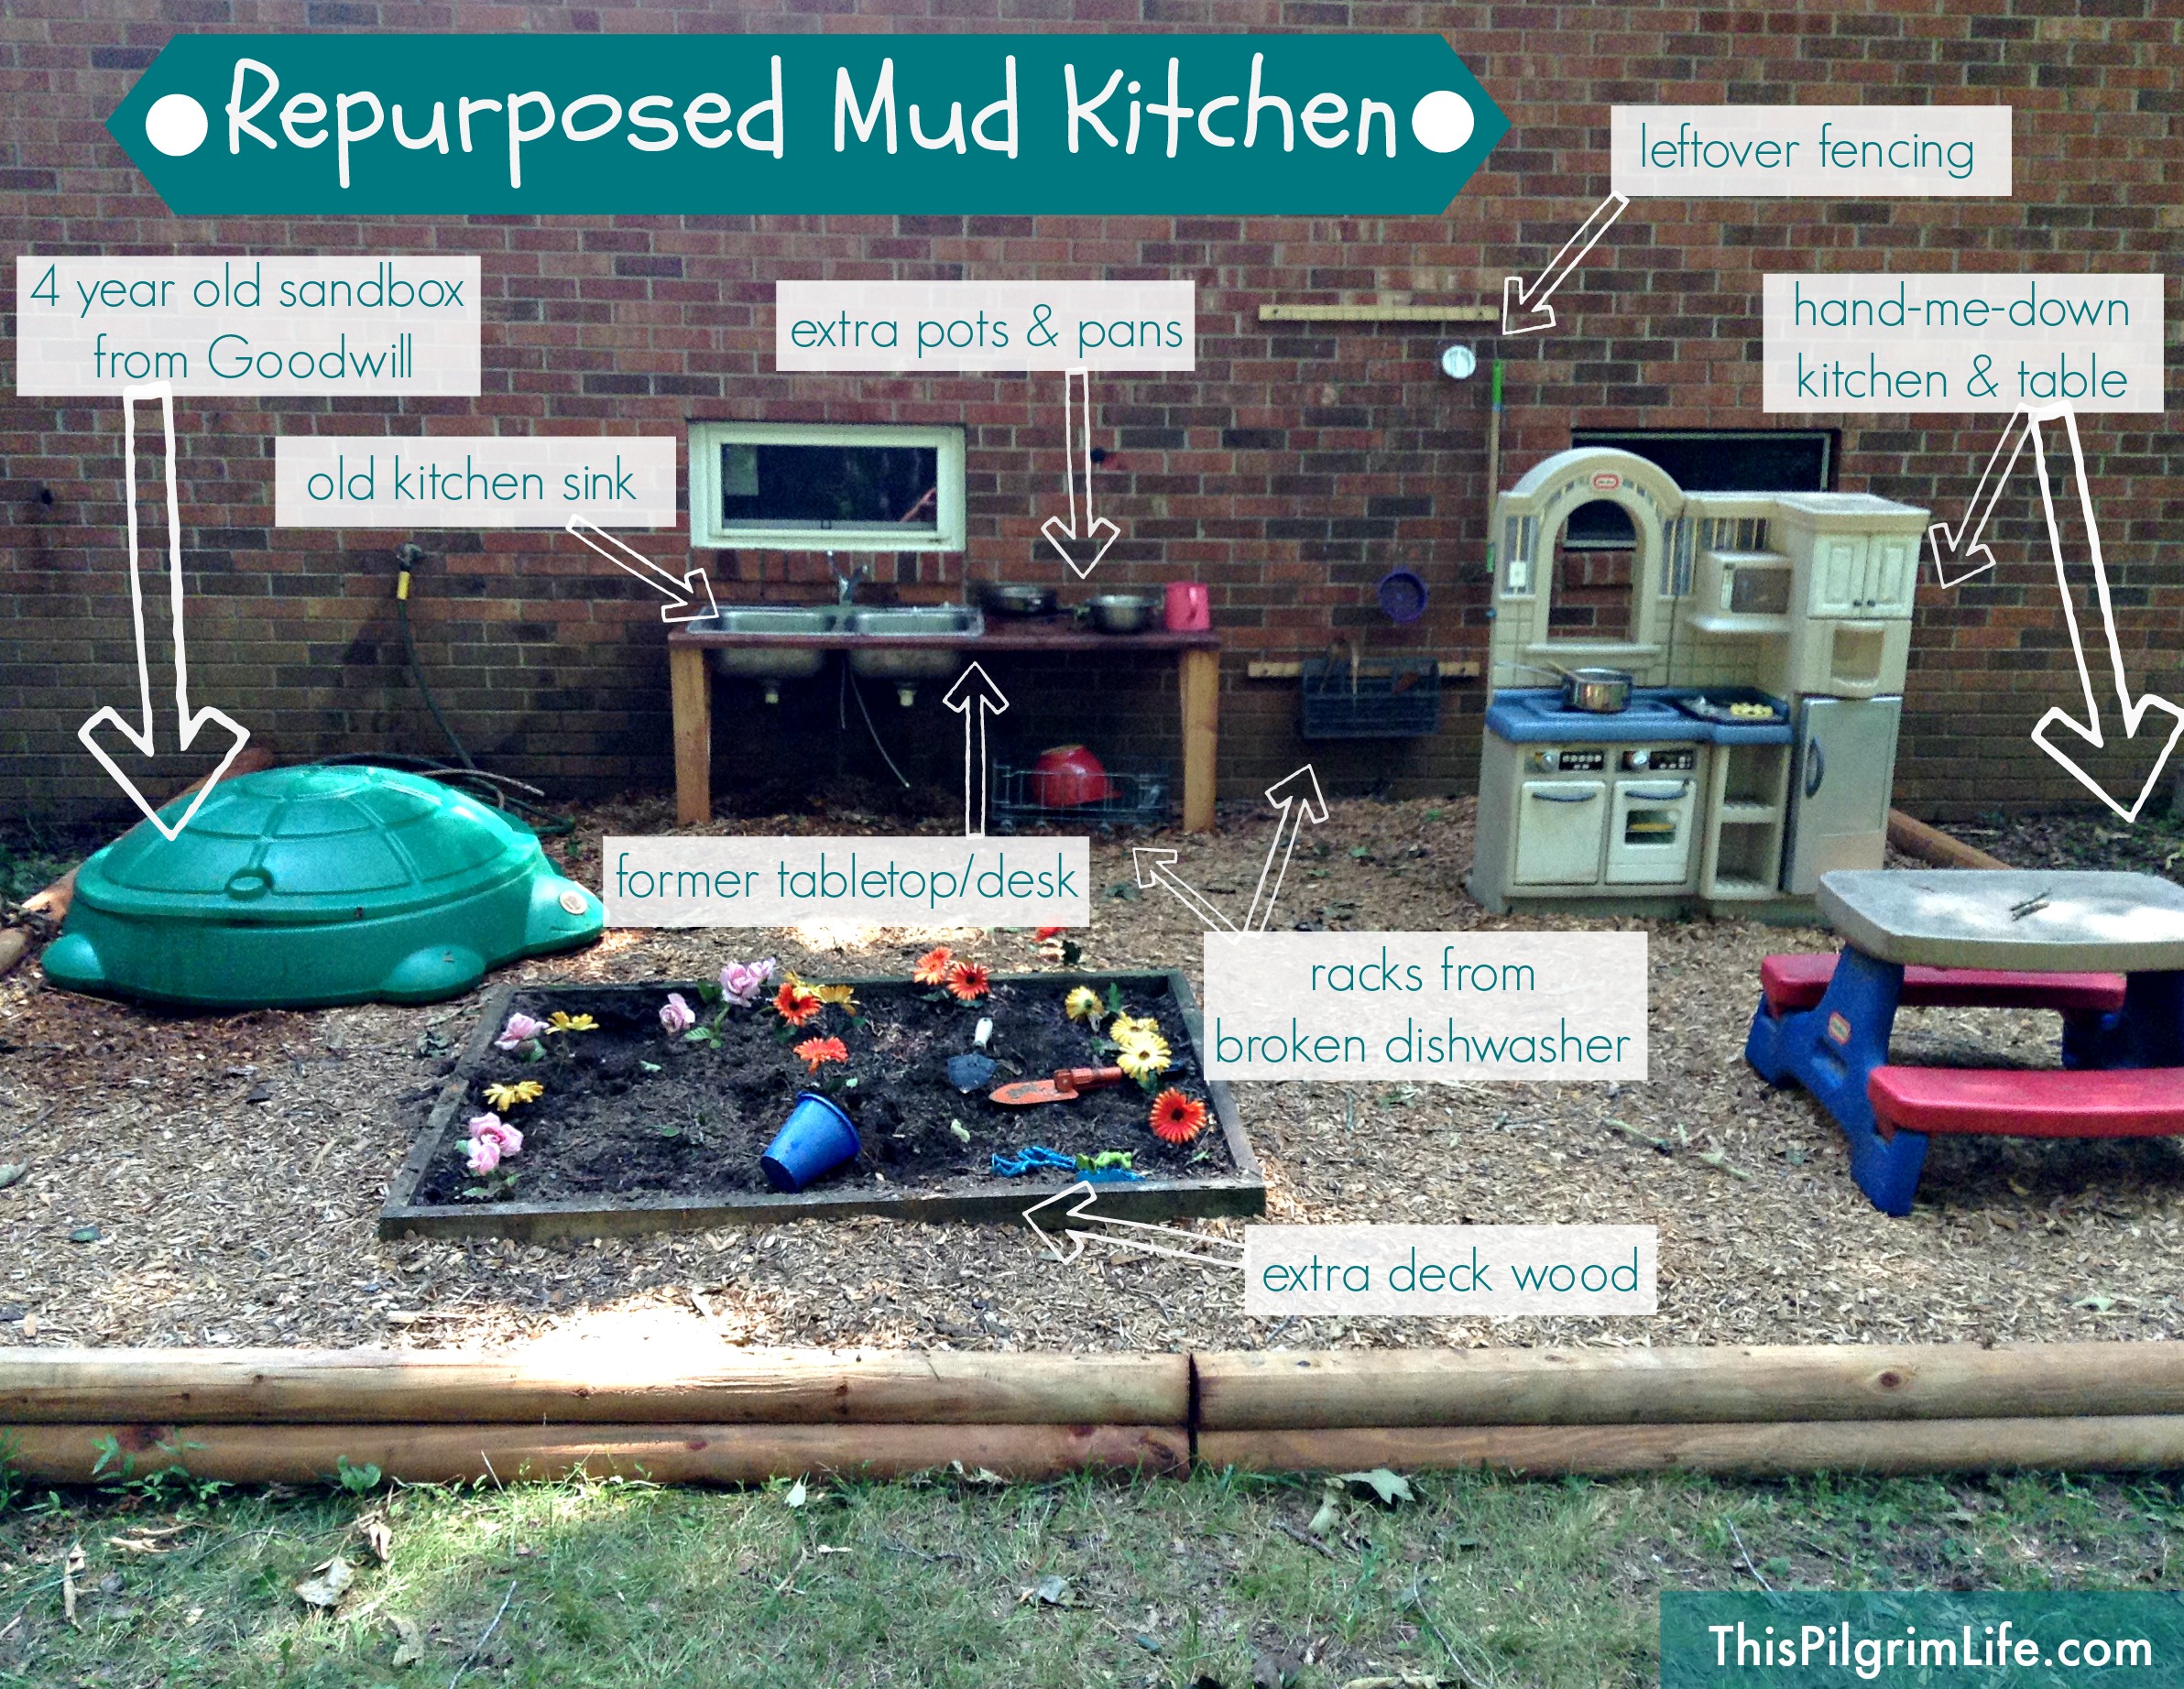 An awesome outdoor mud kitchen made with repurposed items from around the yard and house. Our new favorite backyard hangout!